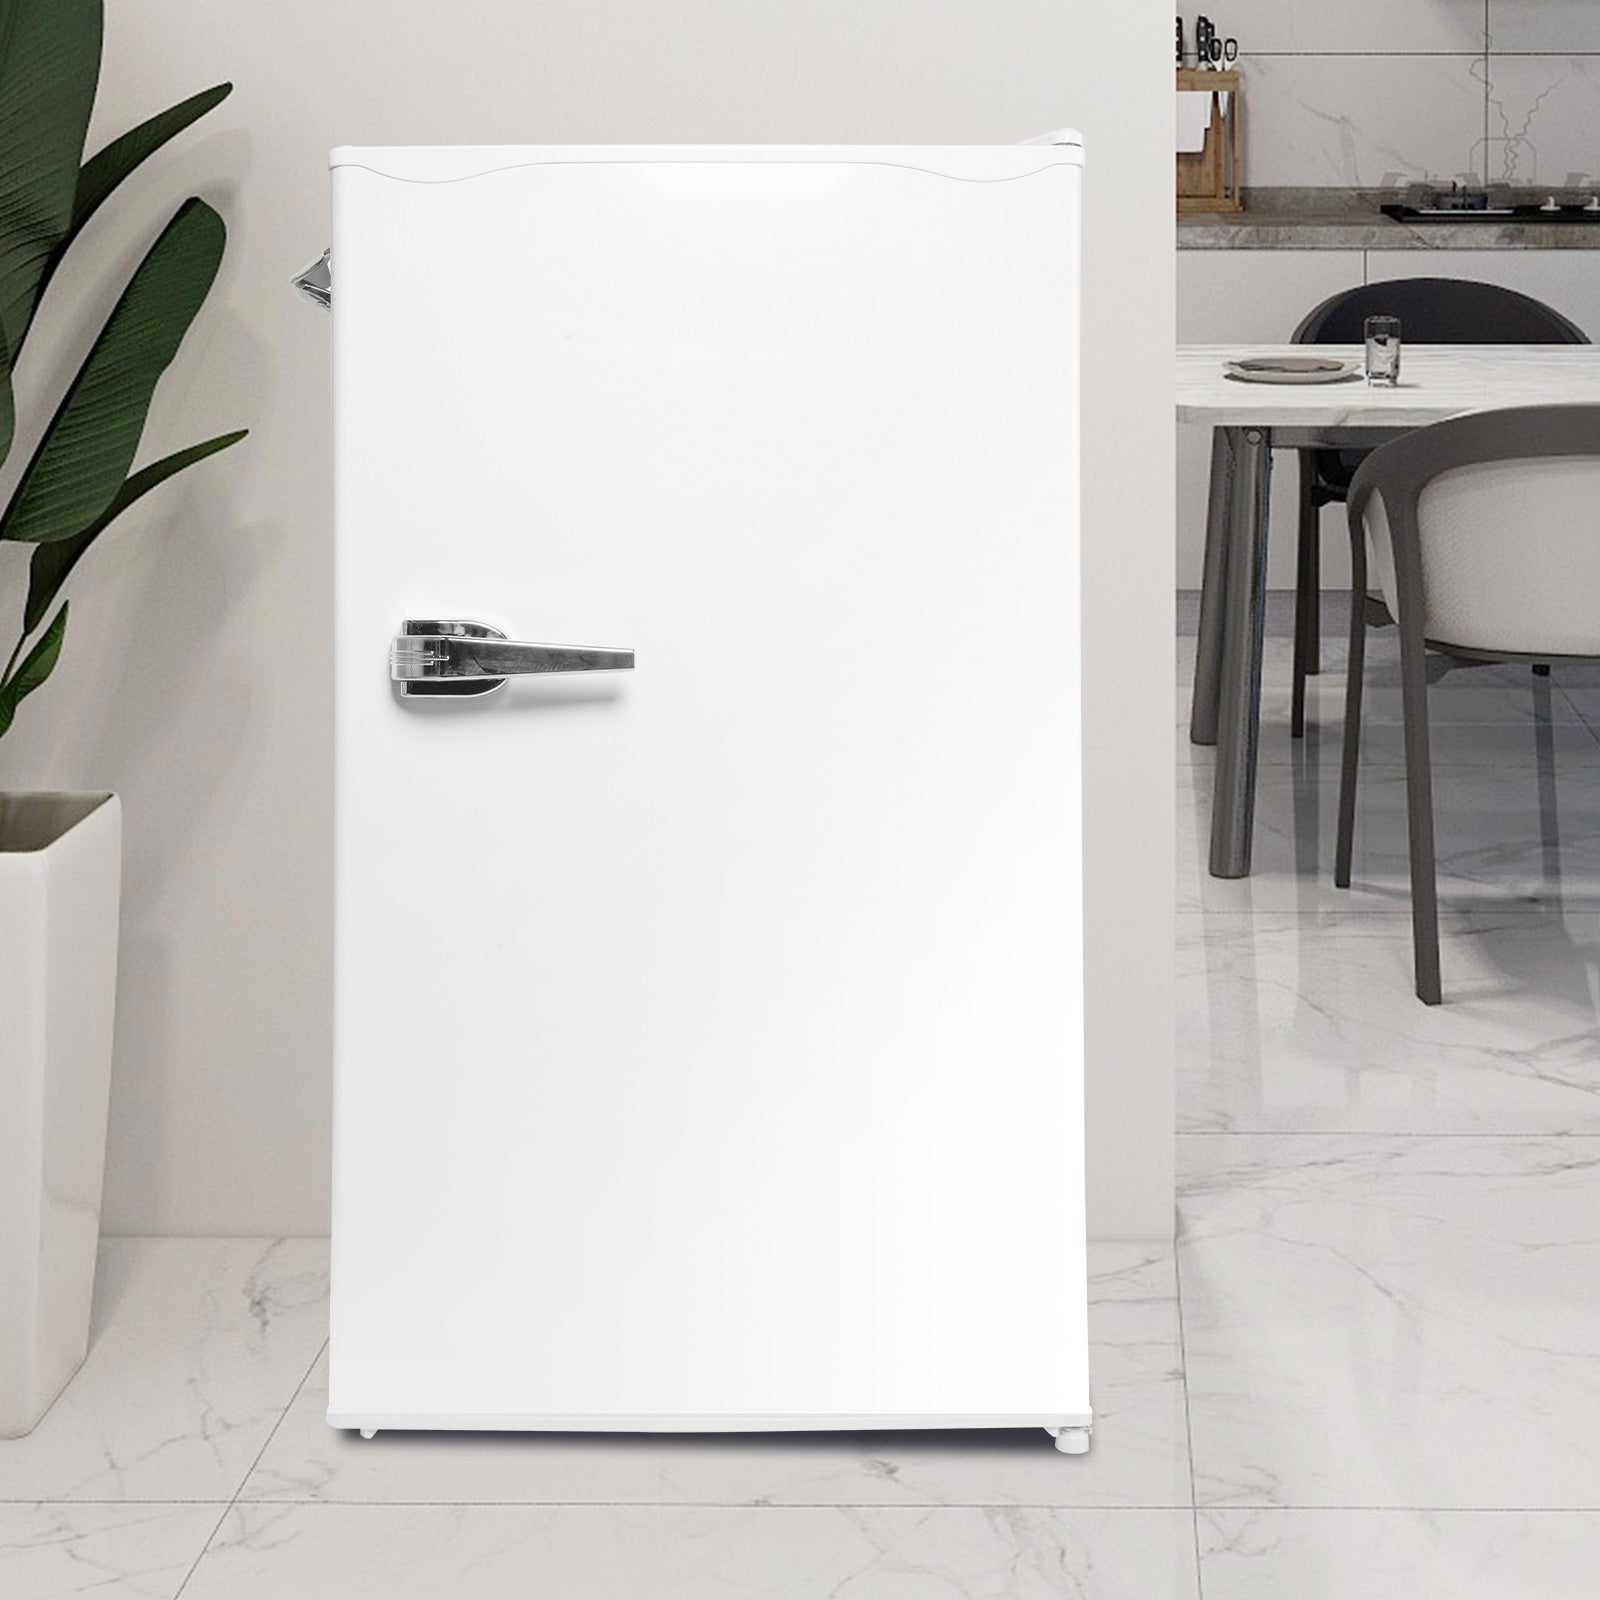 Luckyermore 3.2 Cu.Ft. Small Fridge with Freezer Compact Refrigerator with Adjustable Legs, White